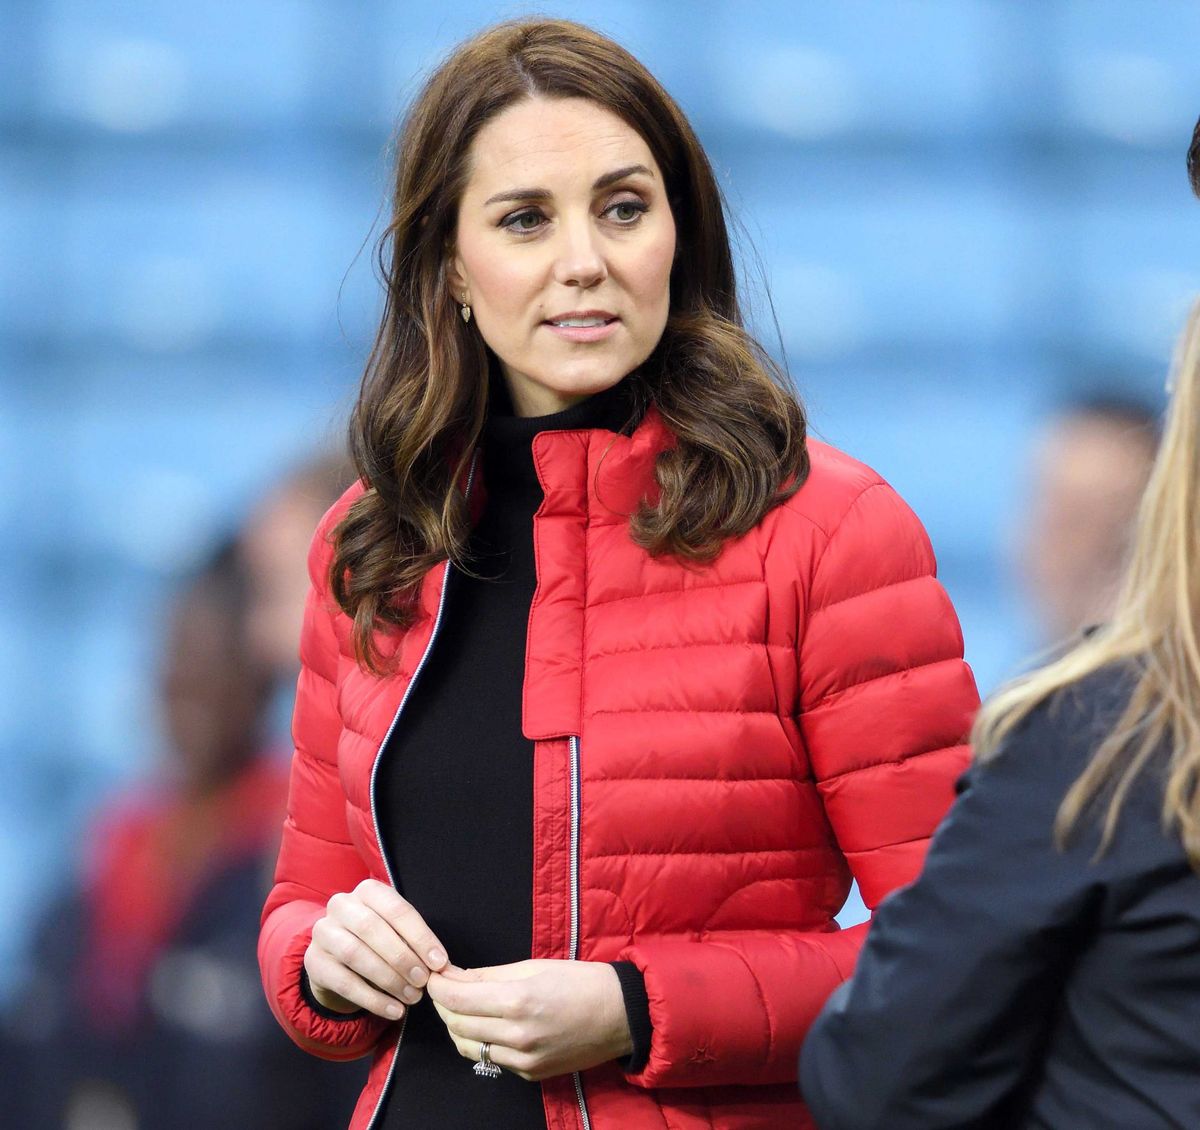 Kate Middleton exercise routine: How she may be keeping fit in lockdown ...